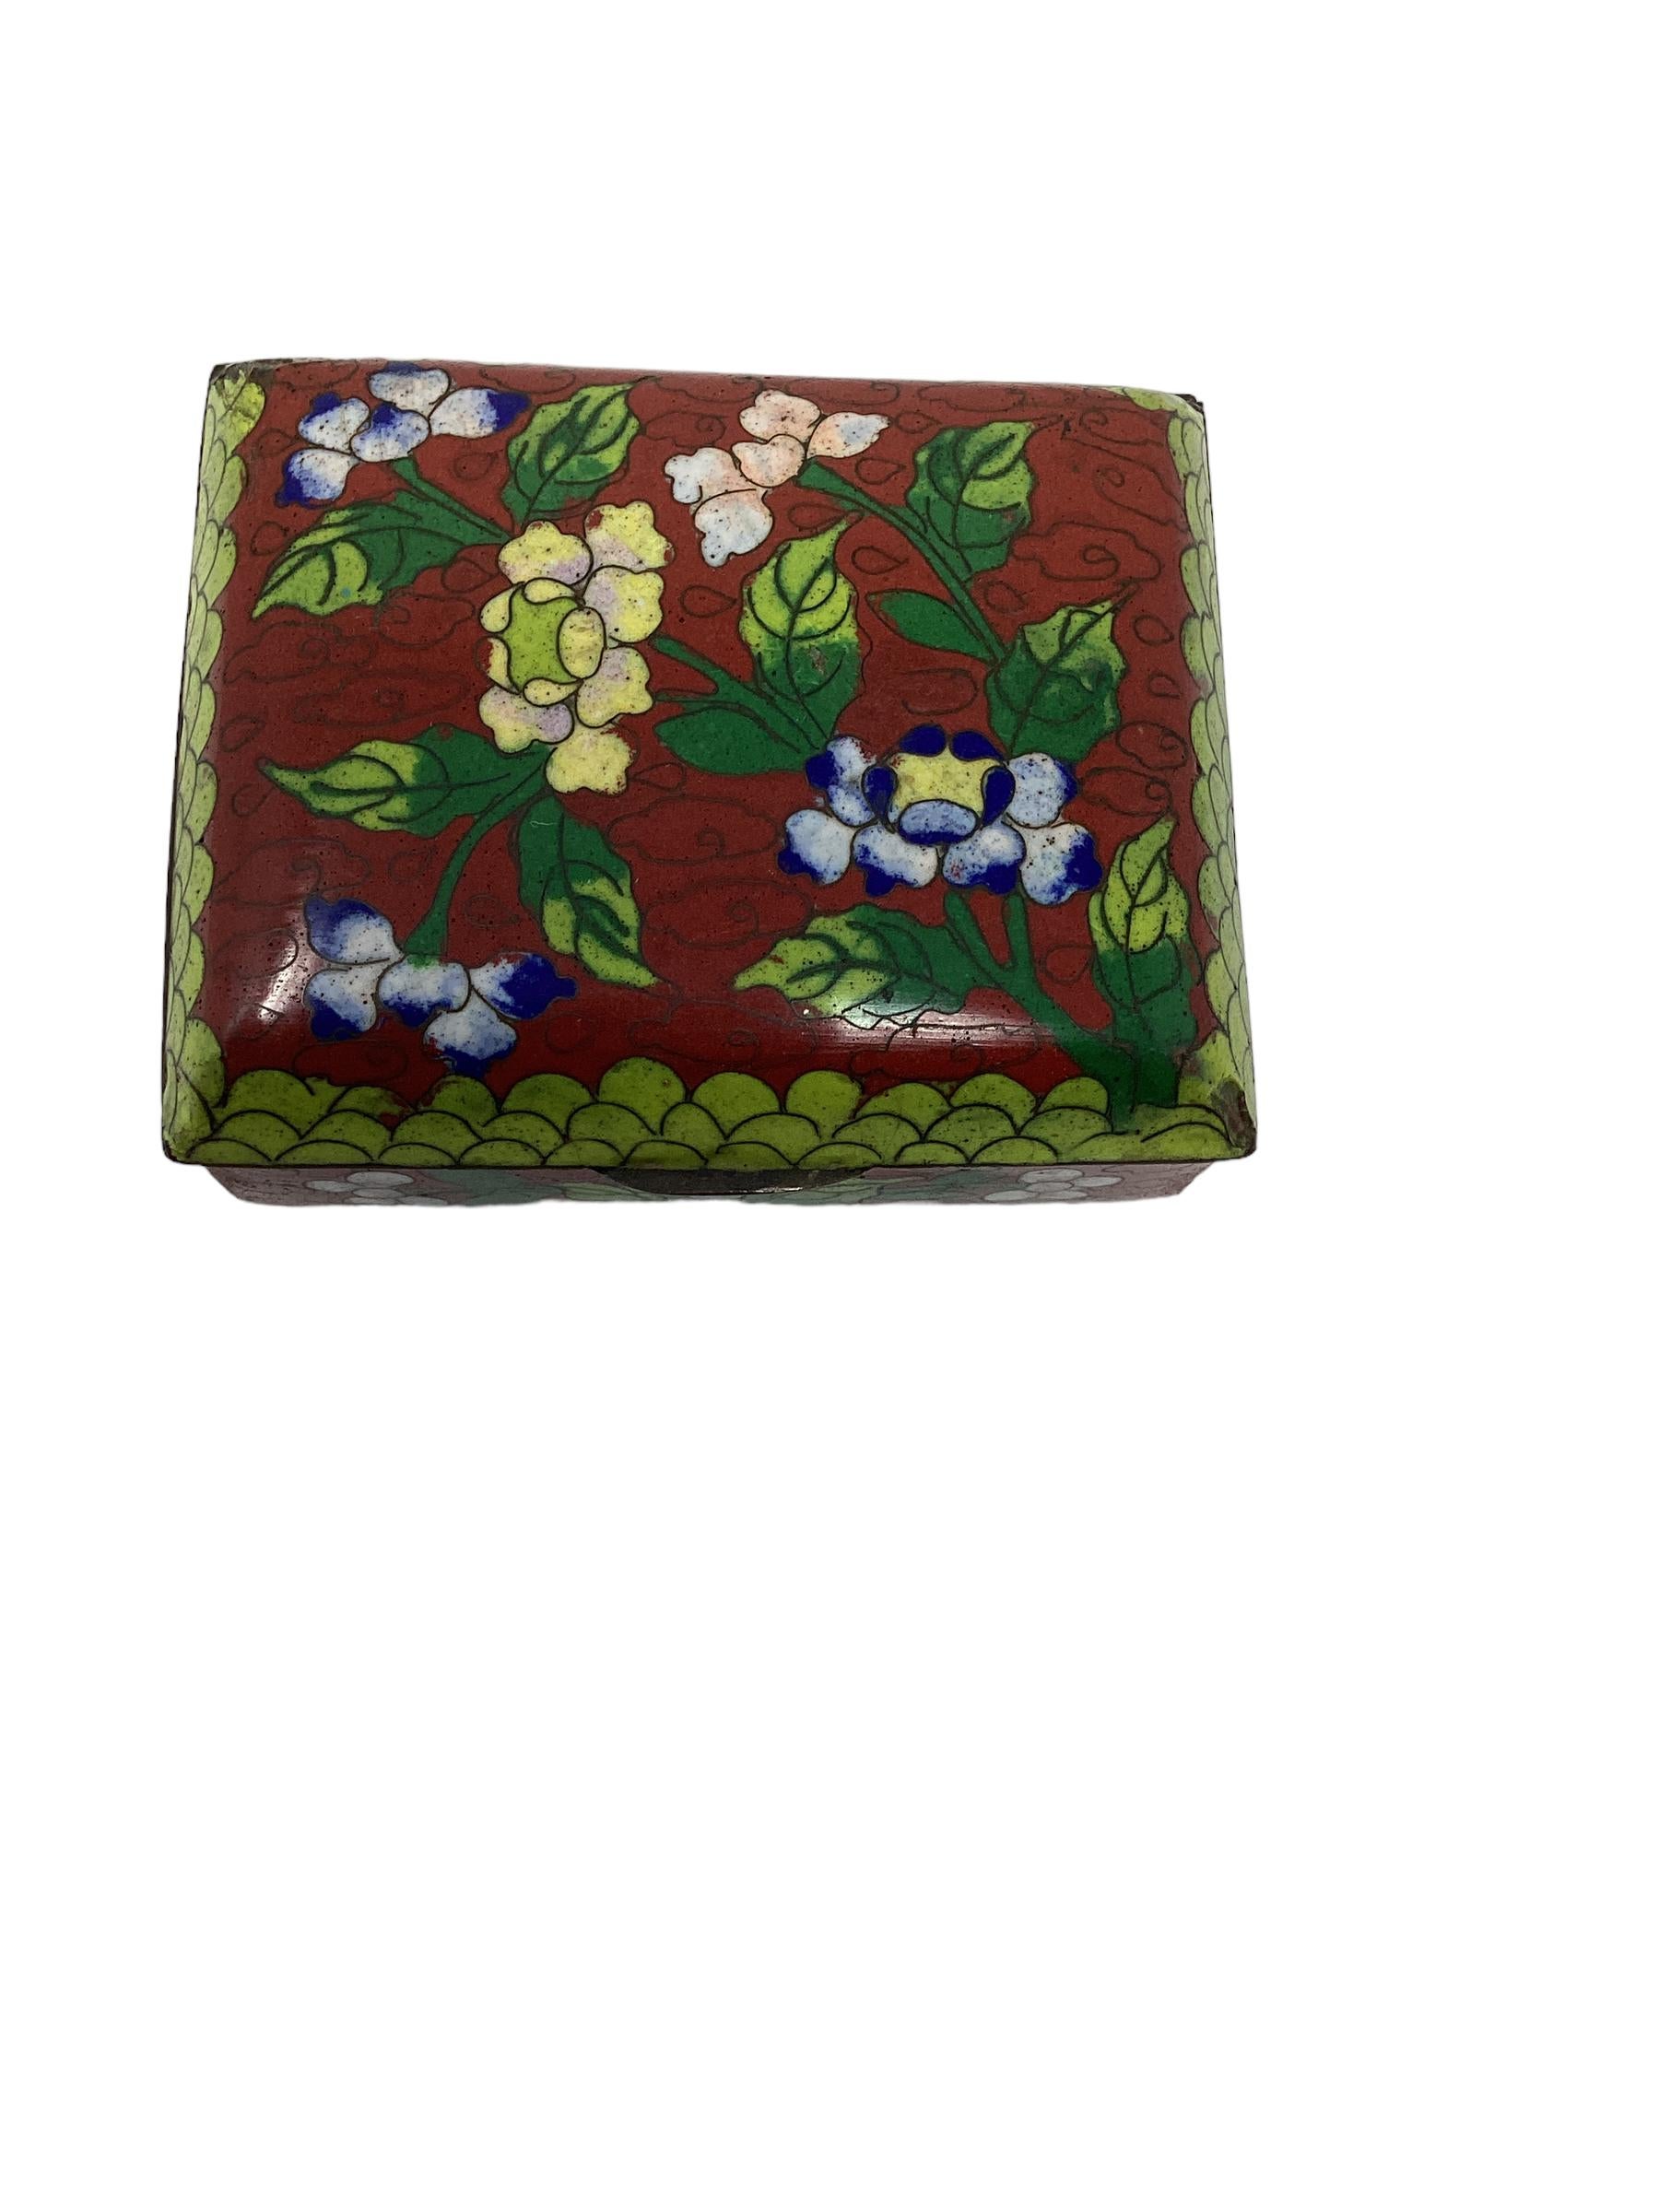 Lovely Chinese export cloisonné box made of brass and enameled with a beautiful floral pattern in beautiful colors of red, green, blue and red. The box rests on ball feet. This chinoiserie box is marked china and dates from 1900-1920. This